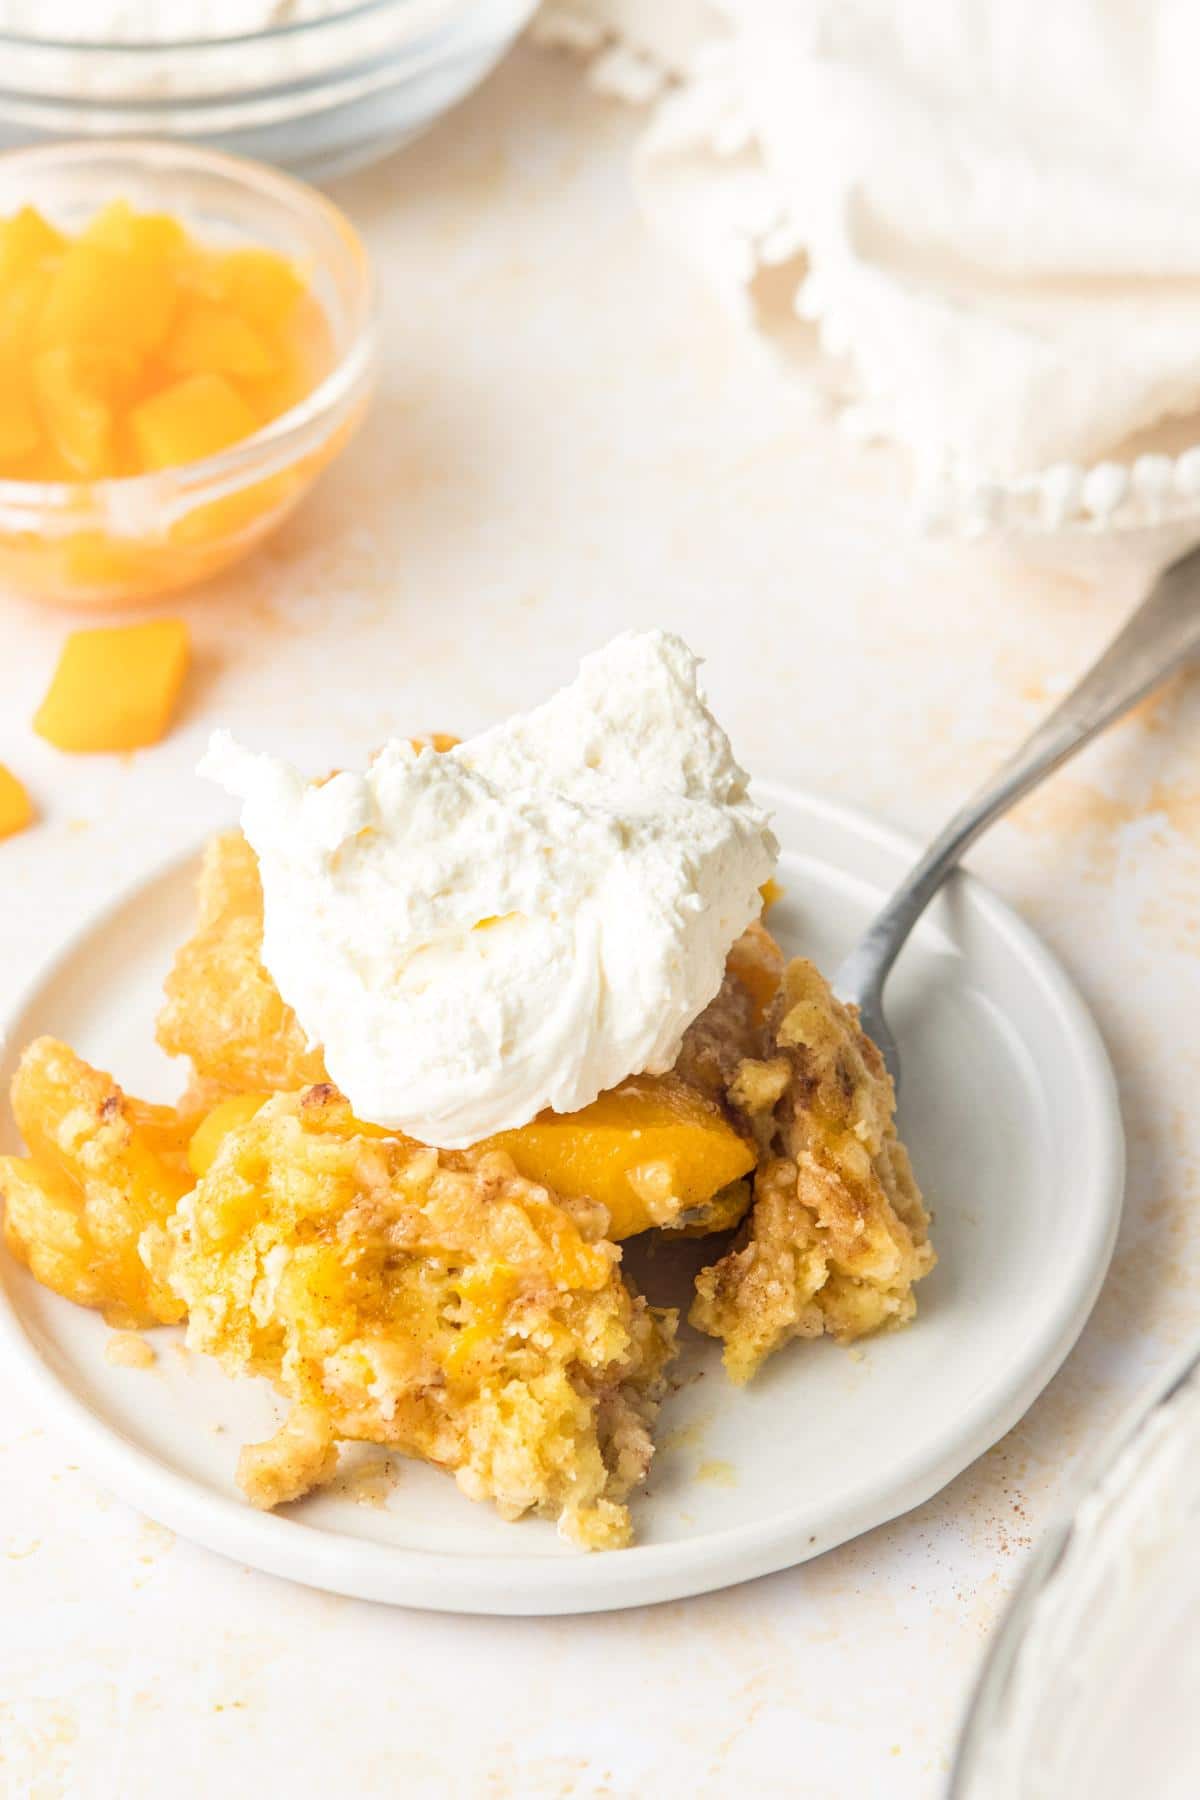 portion of small peach cobbler on plate, with whipped cream